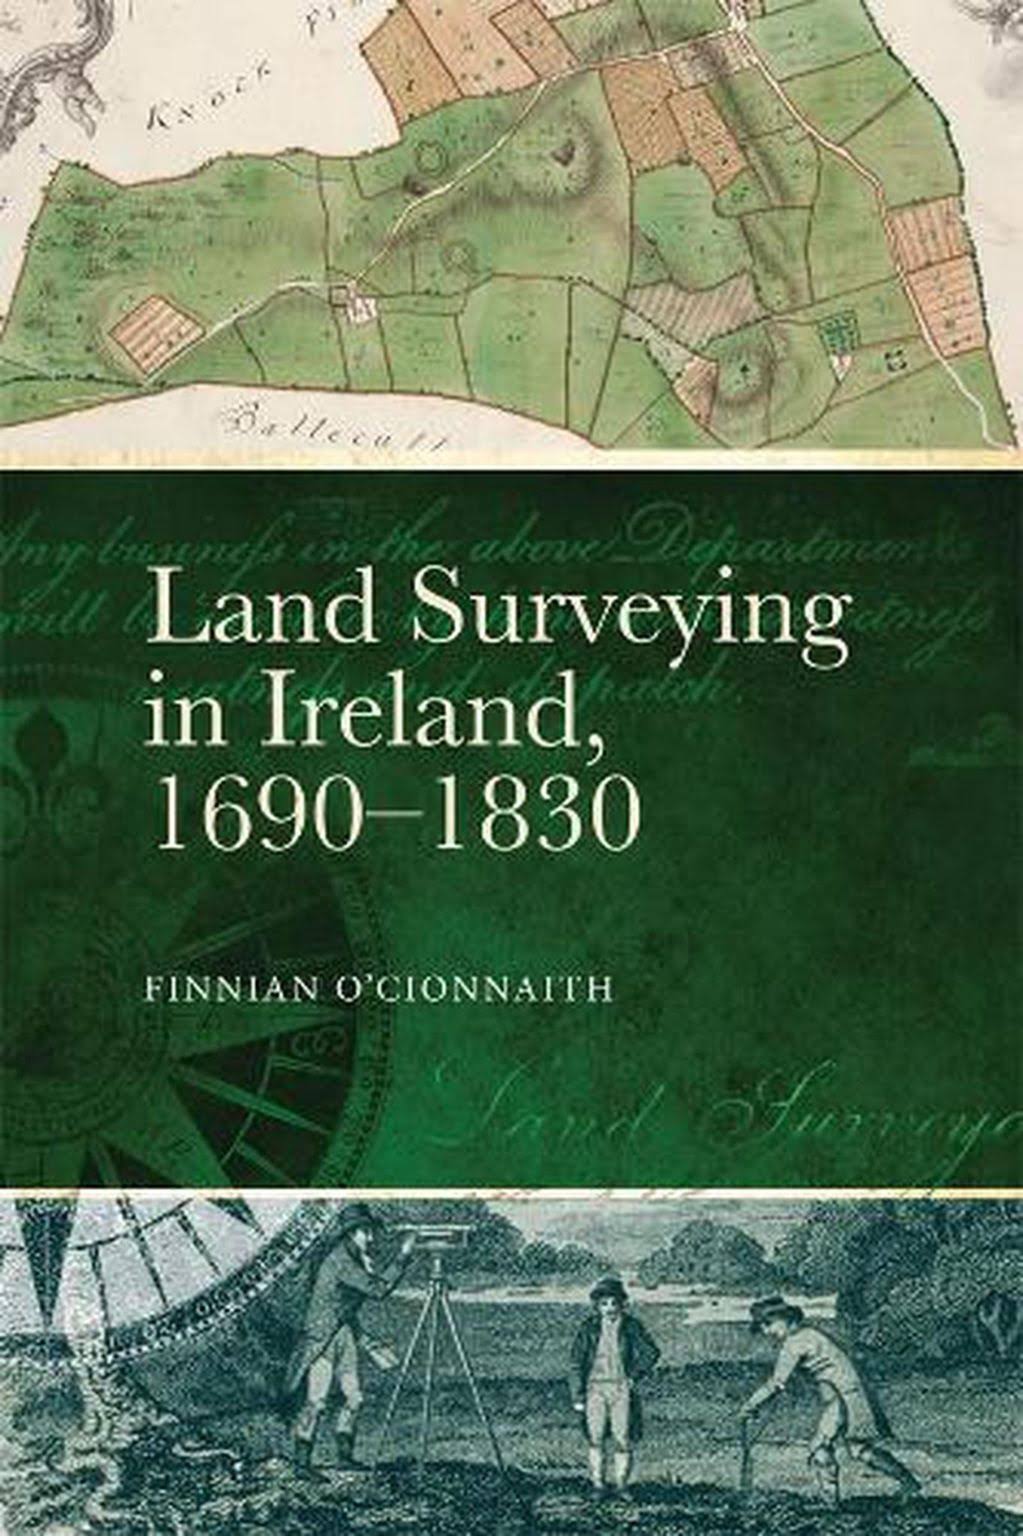 Land Surveying in Ireland, 1690-1830: A History [Book]